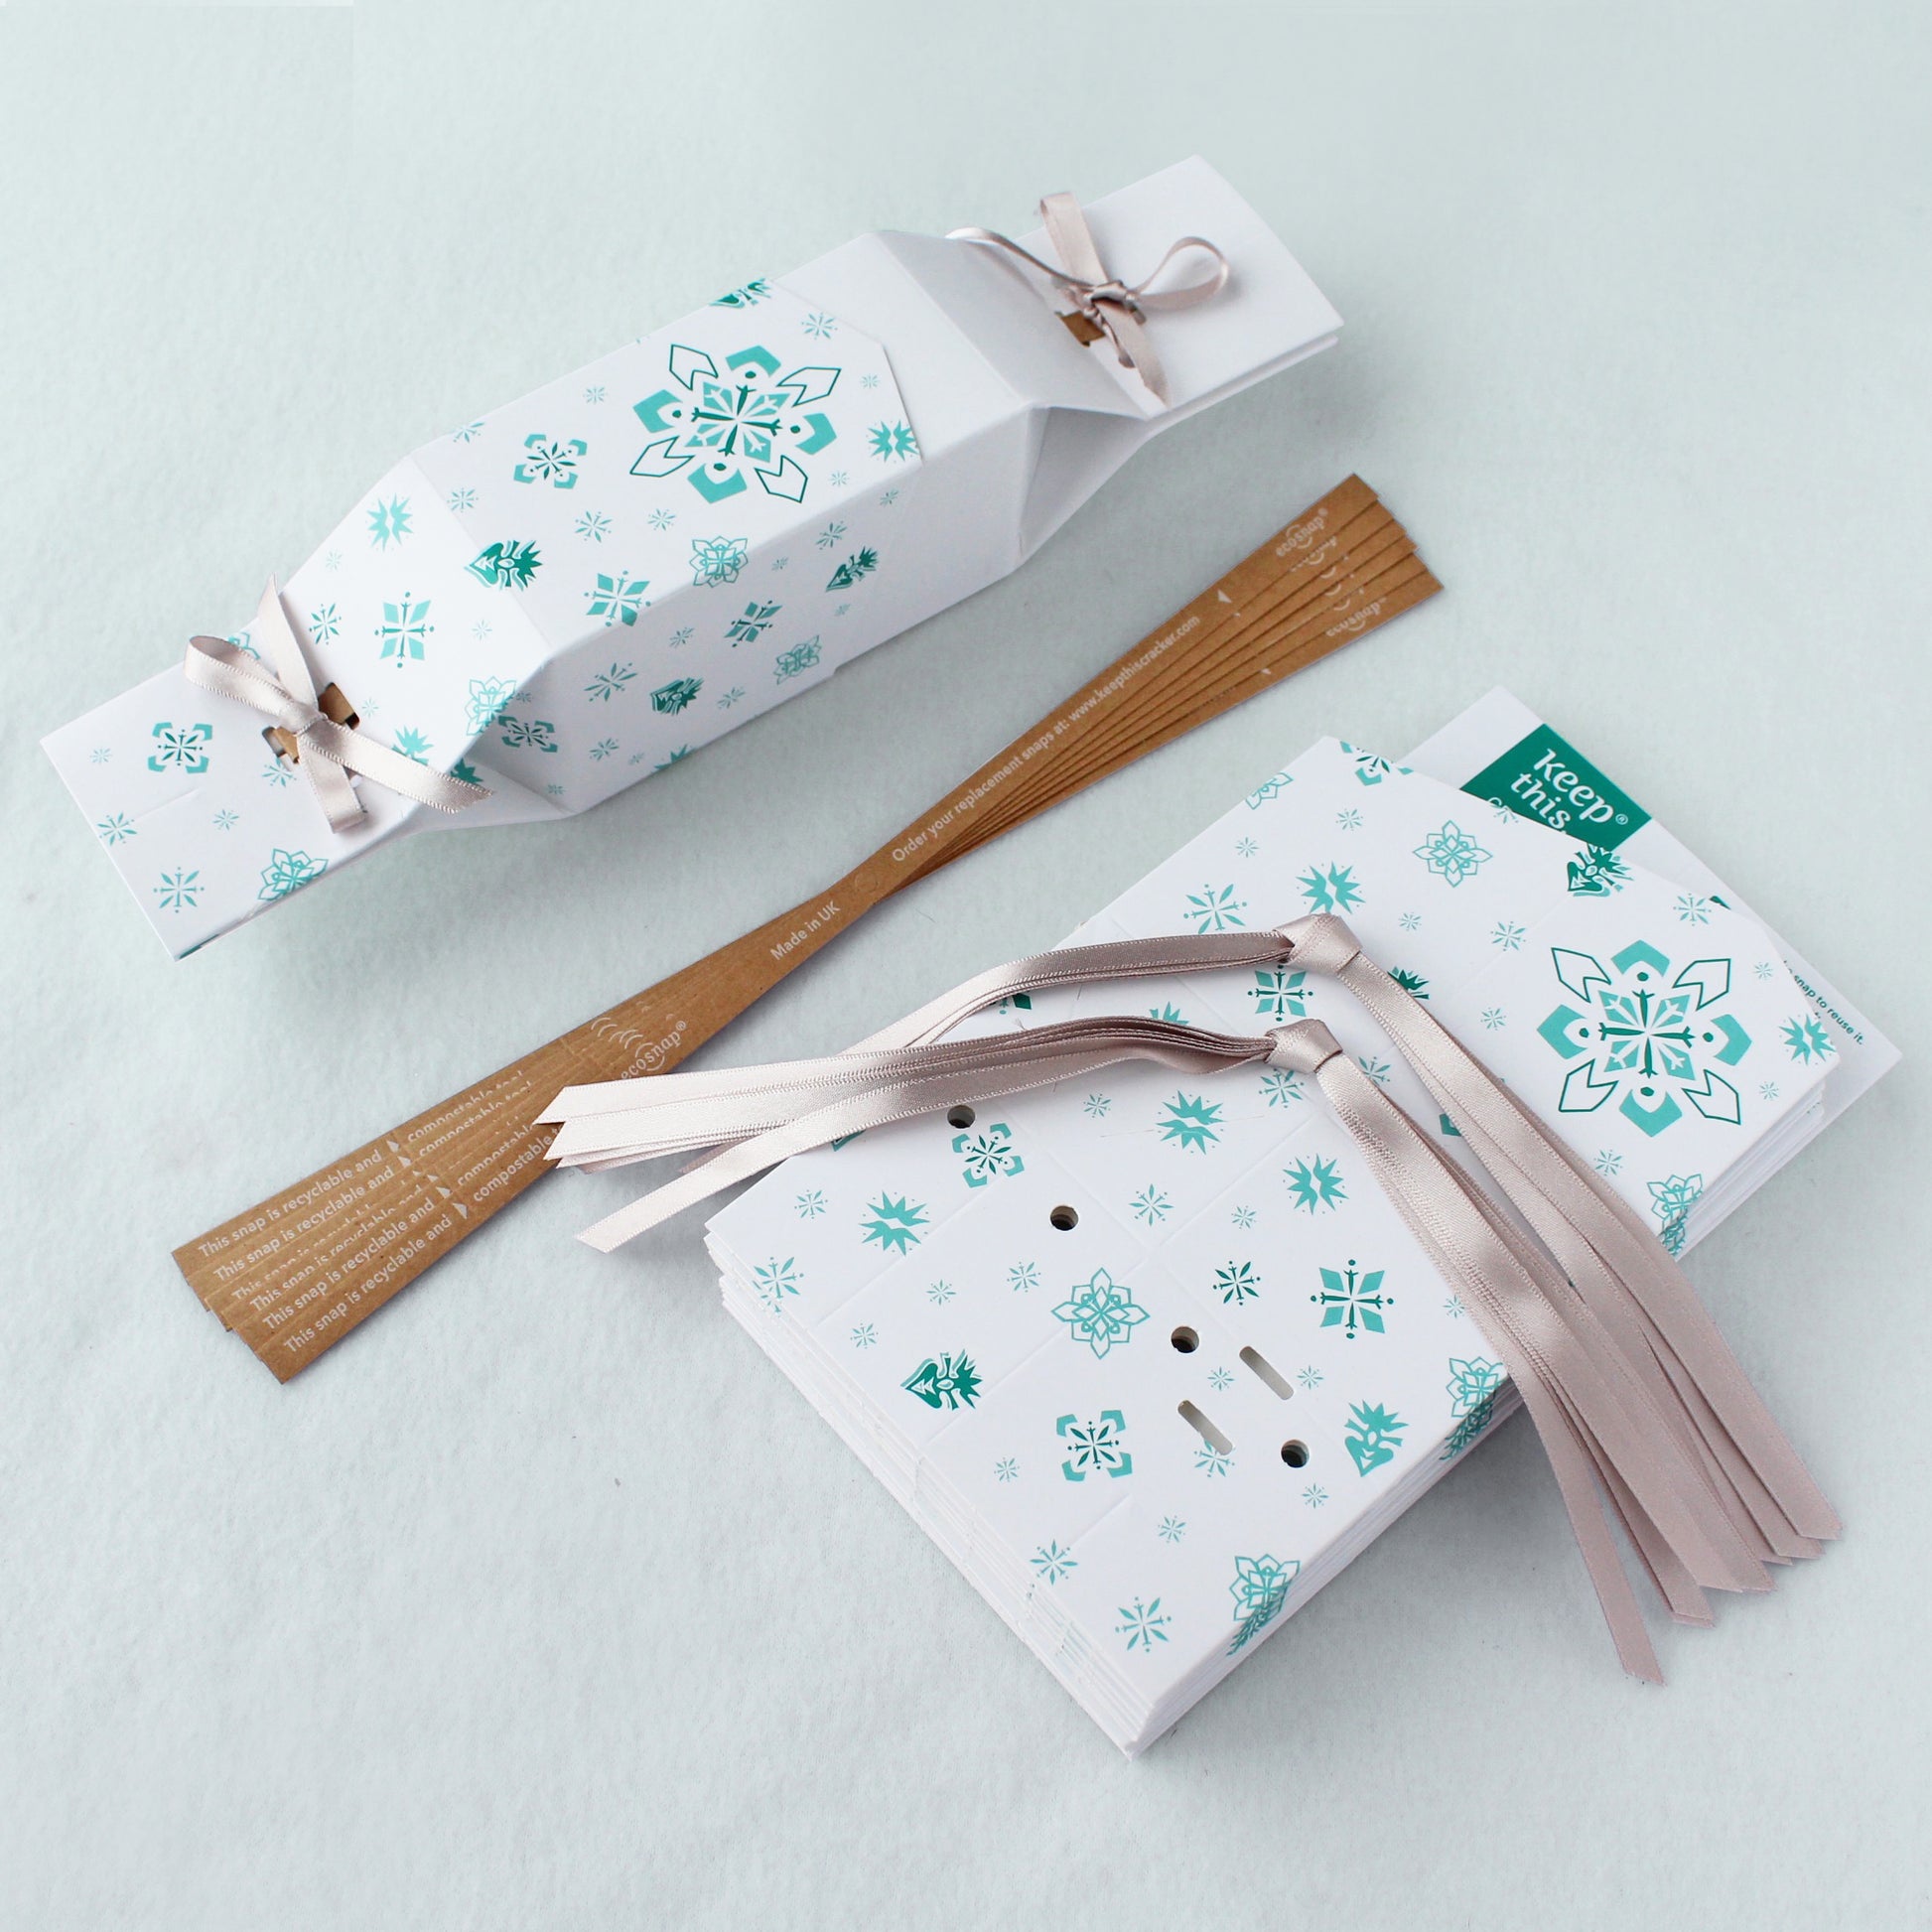 Reusable Christmas Crackers - Sustainable and festive choice for planet-conscious holiday traditions